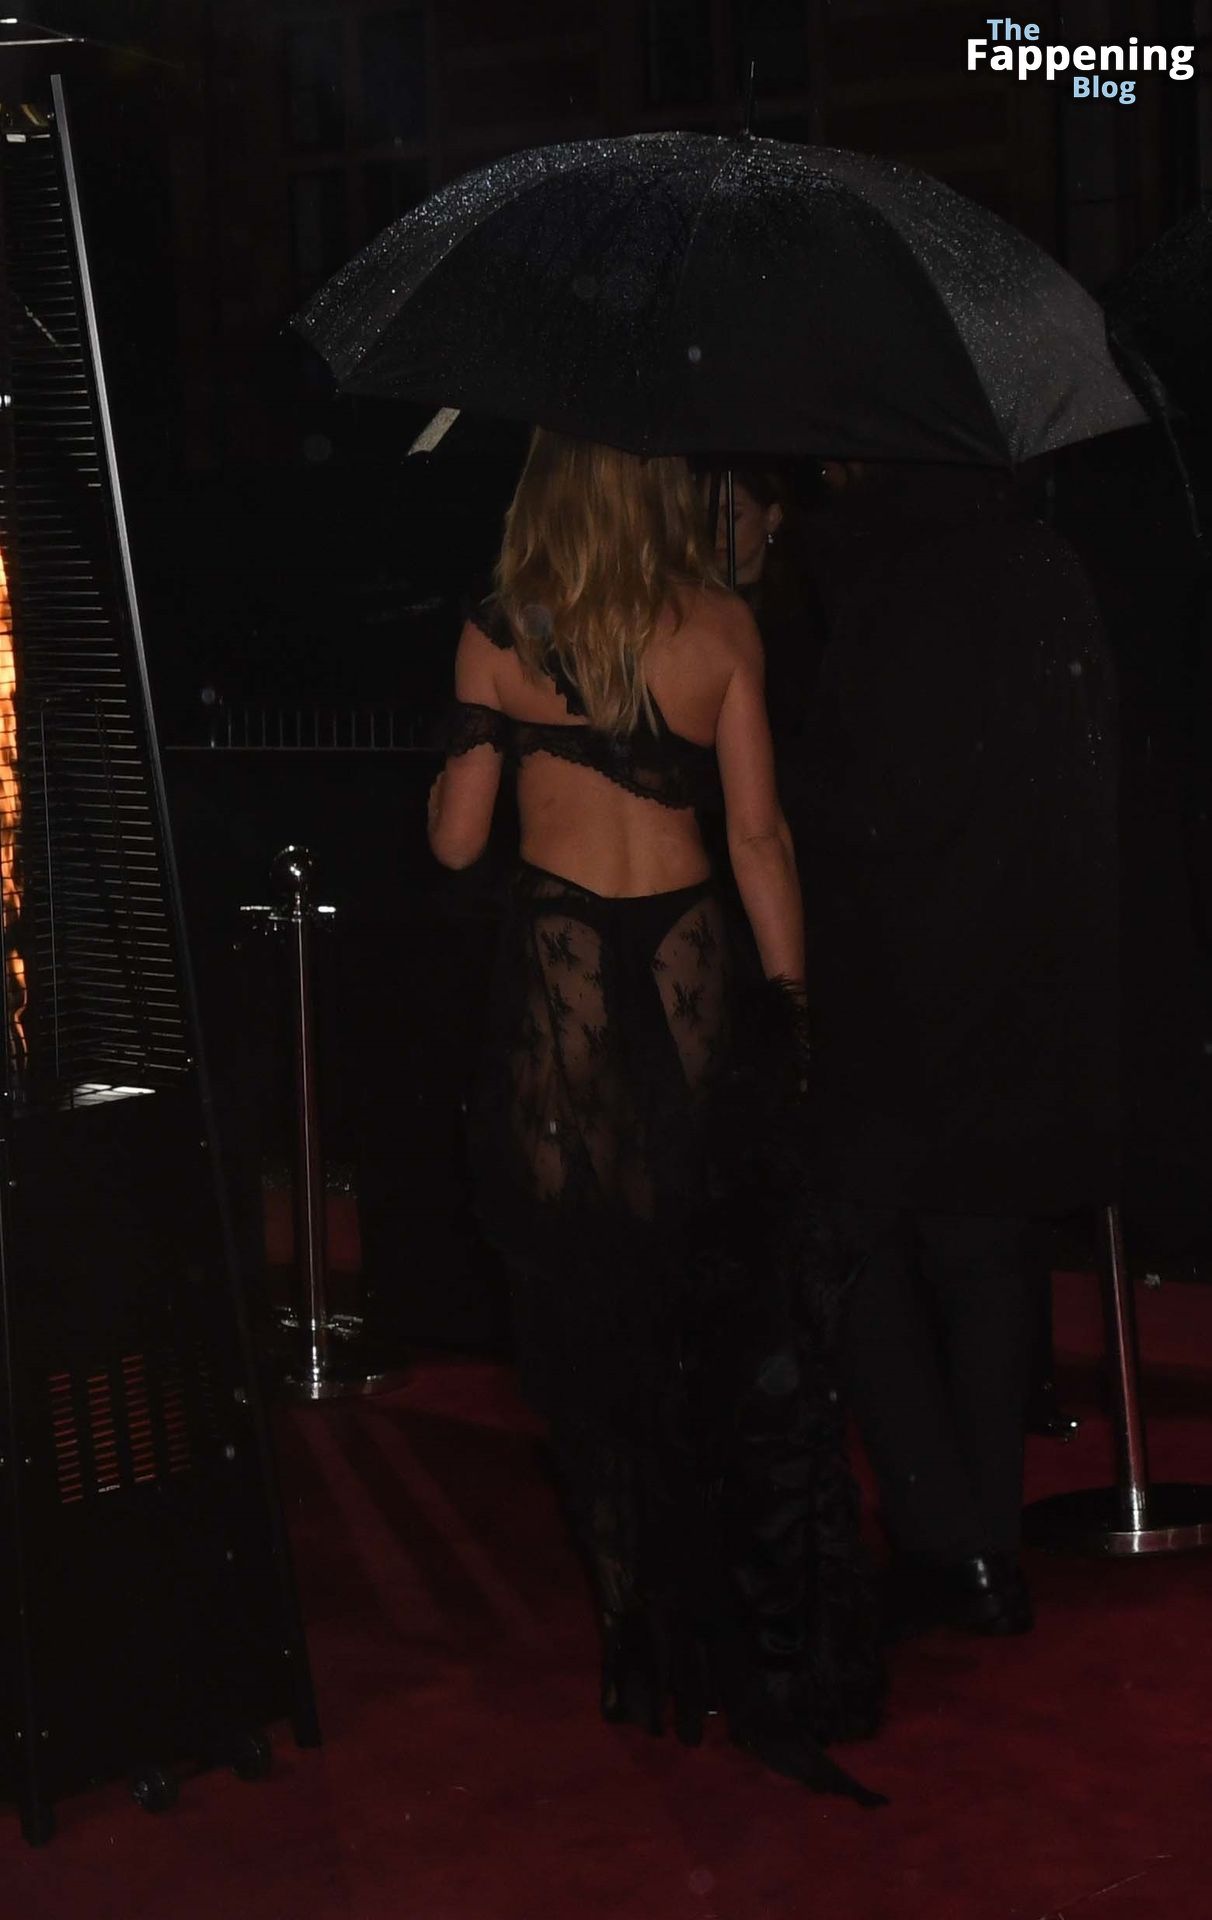 Abbey-Clancy-Sexy-79-The-Fappening-Blog.jpg